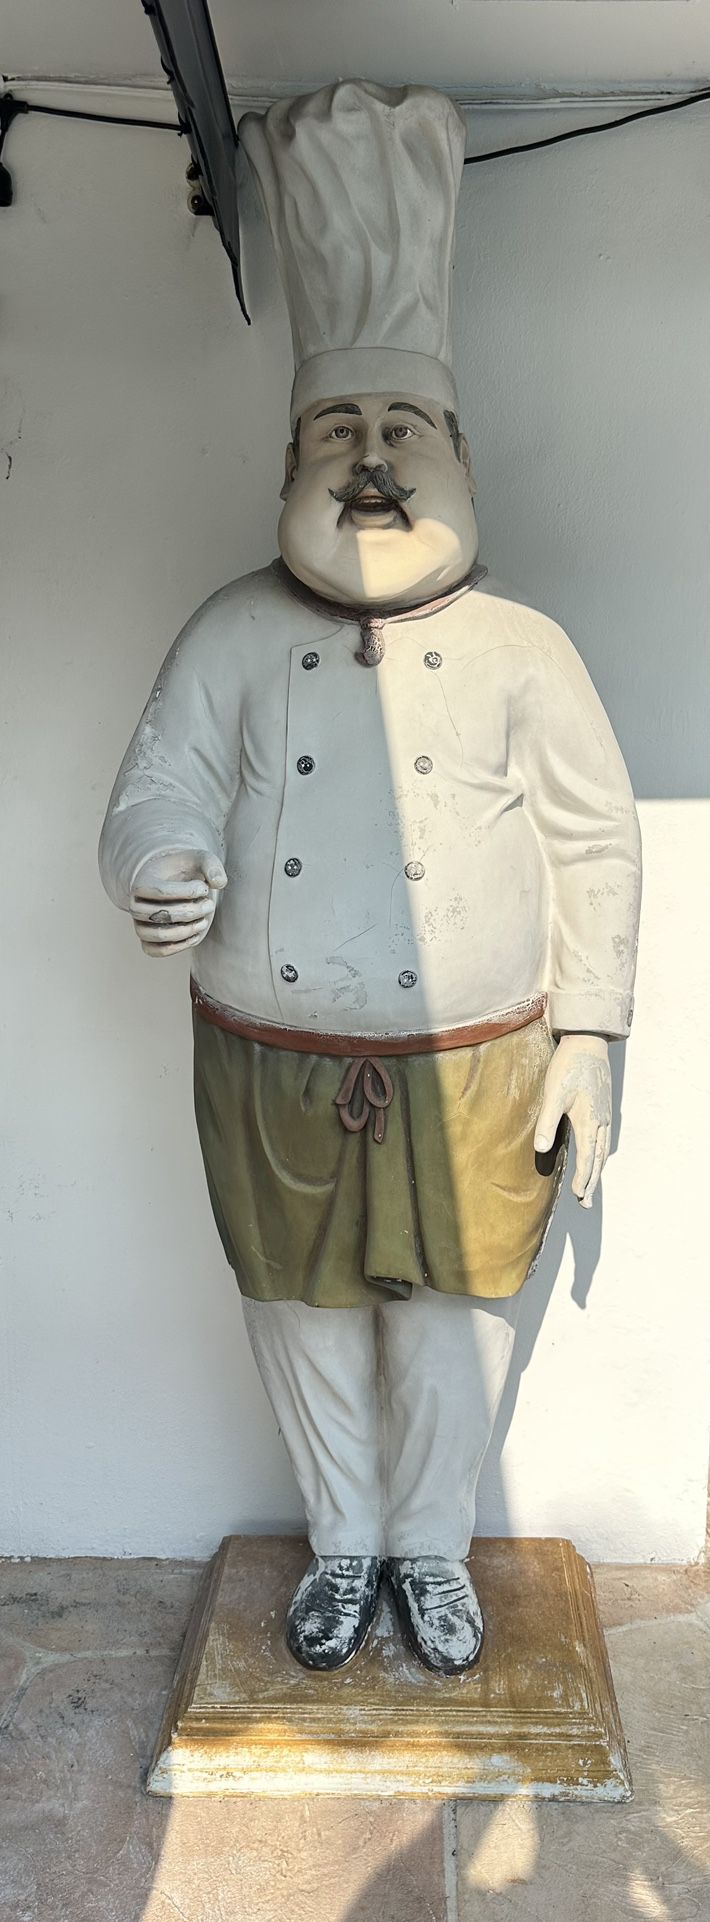 7ft Tall Chef Statue